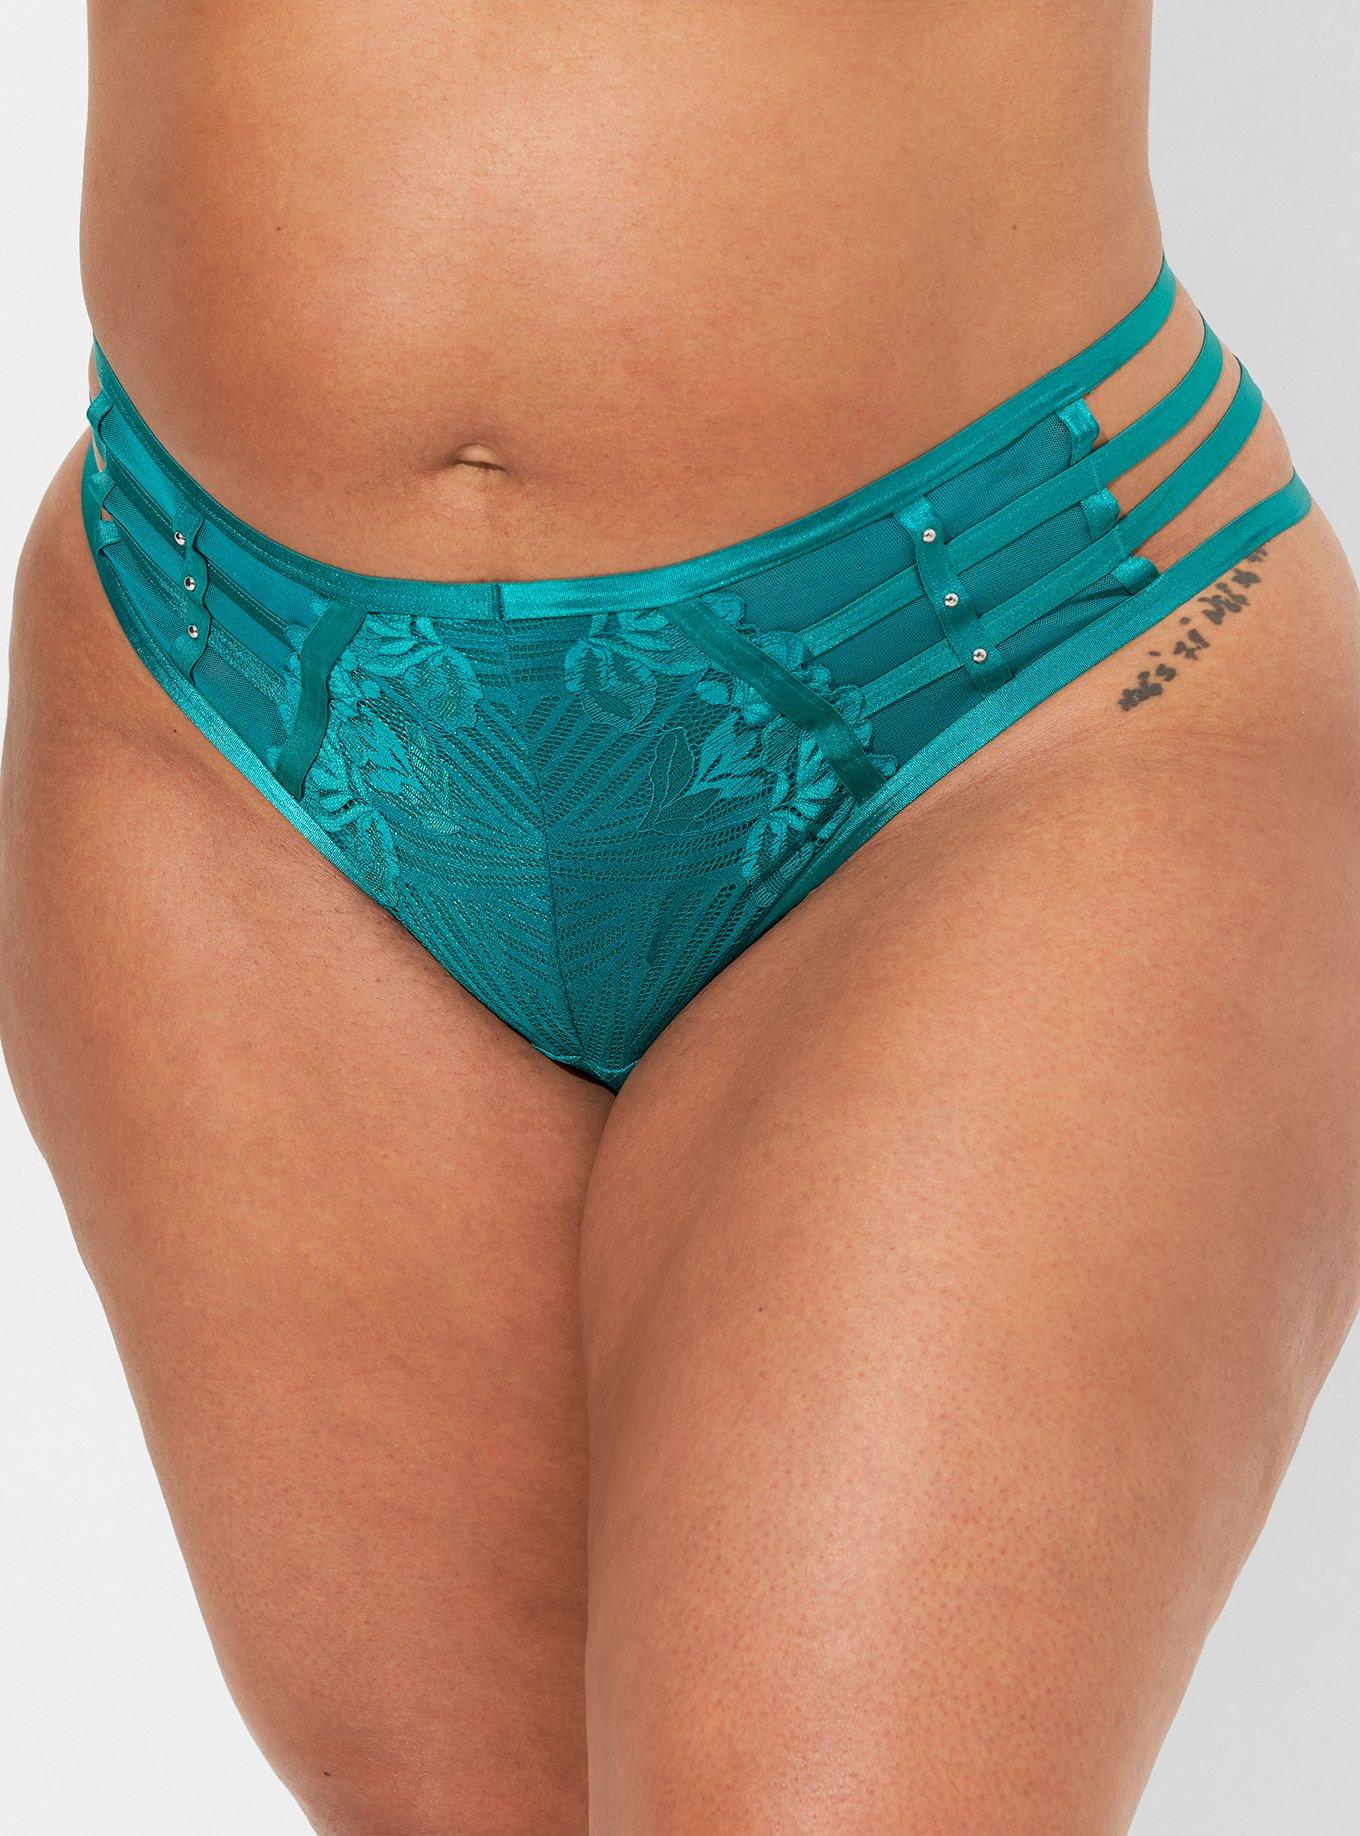 Torrid Sexy Teal Green Studded Thong Bodysuit Lingerie Plus Size